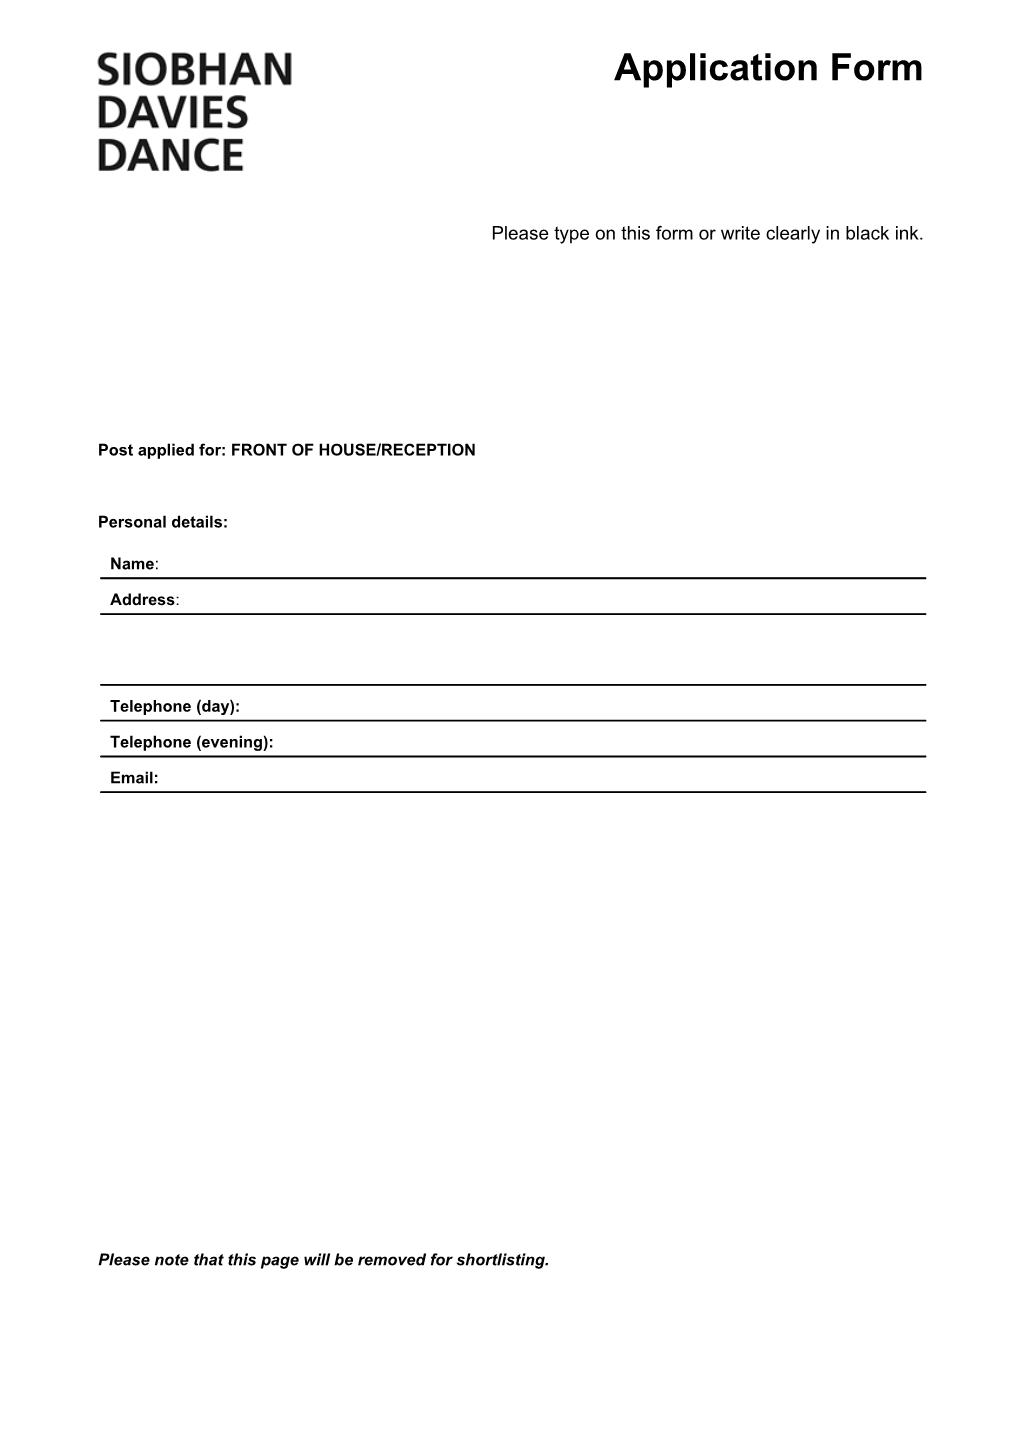 Please Type on This Form Or Write Clearly in Black Ink